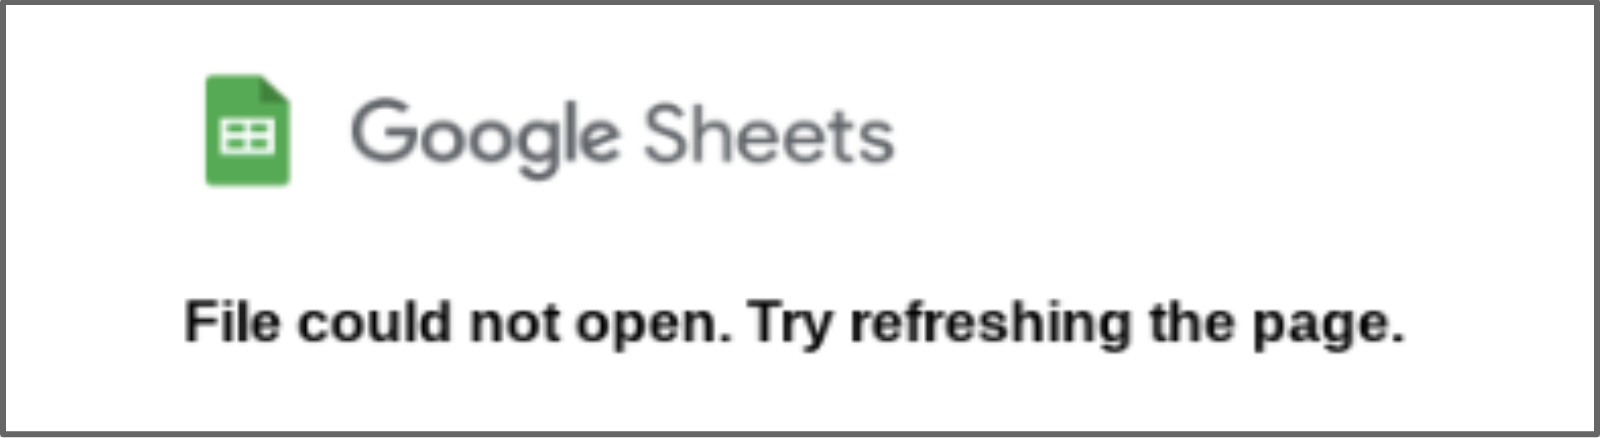 google sheets file could not open. try refreshing the page